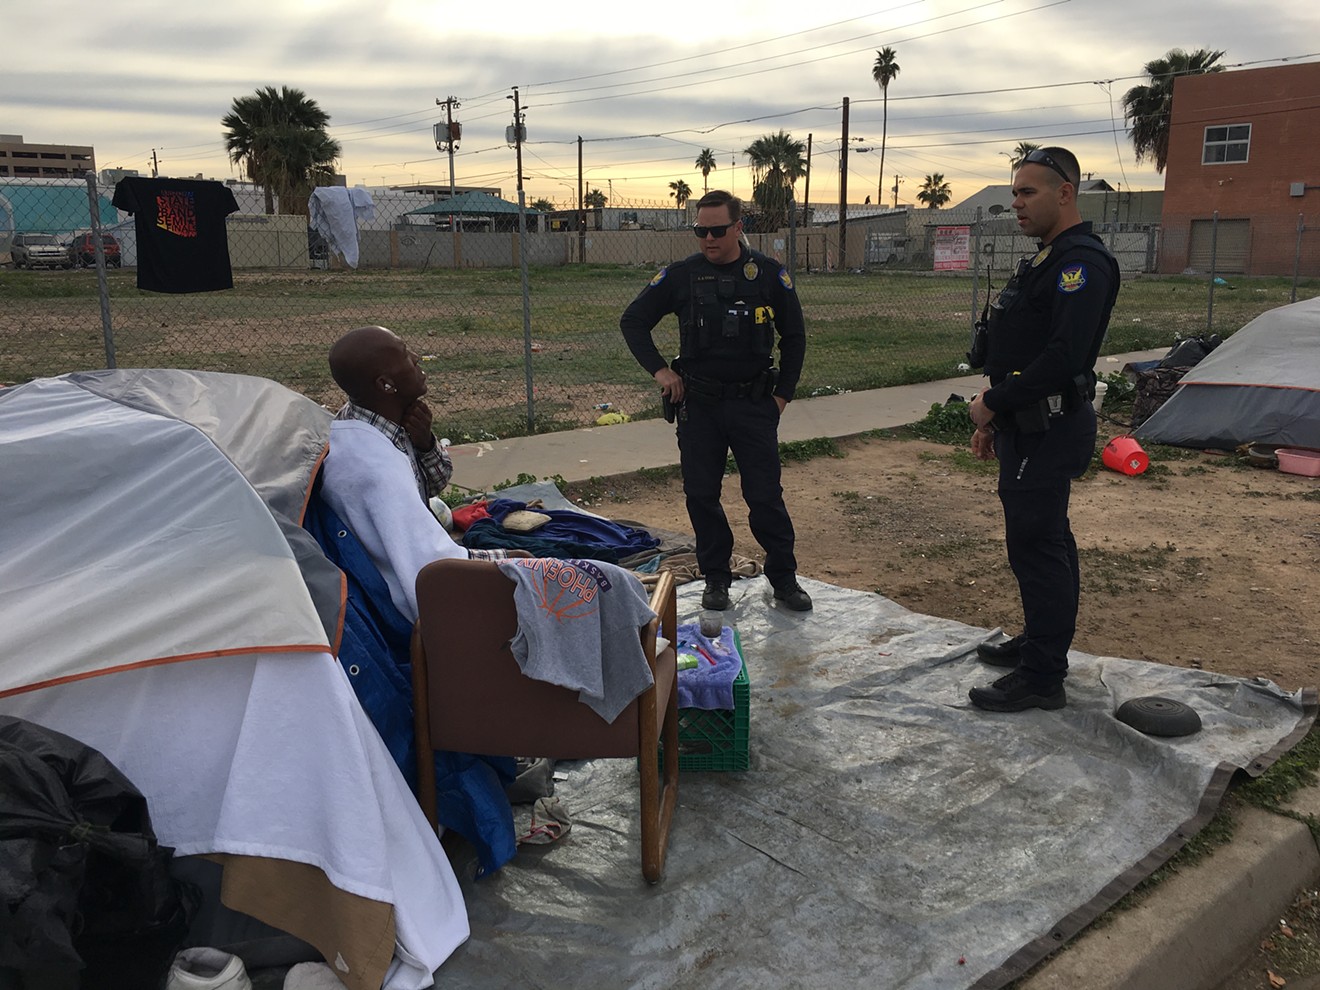 On the morning of February 5, 2020, hundreds of people at a homeless encampment in downtown Phoenix were told to disperse temporarily to allow for street cleaning.